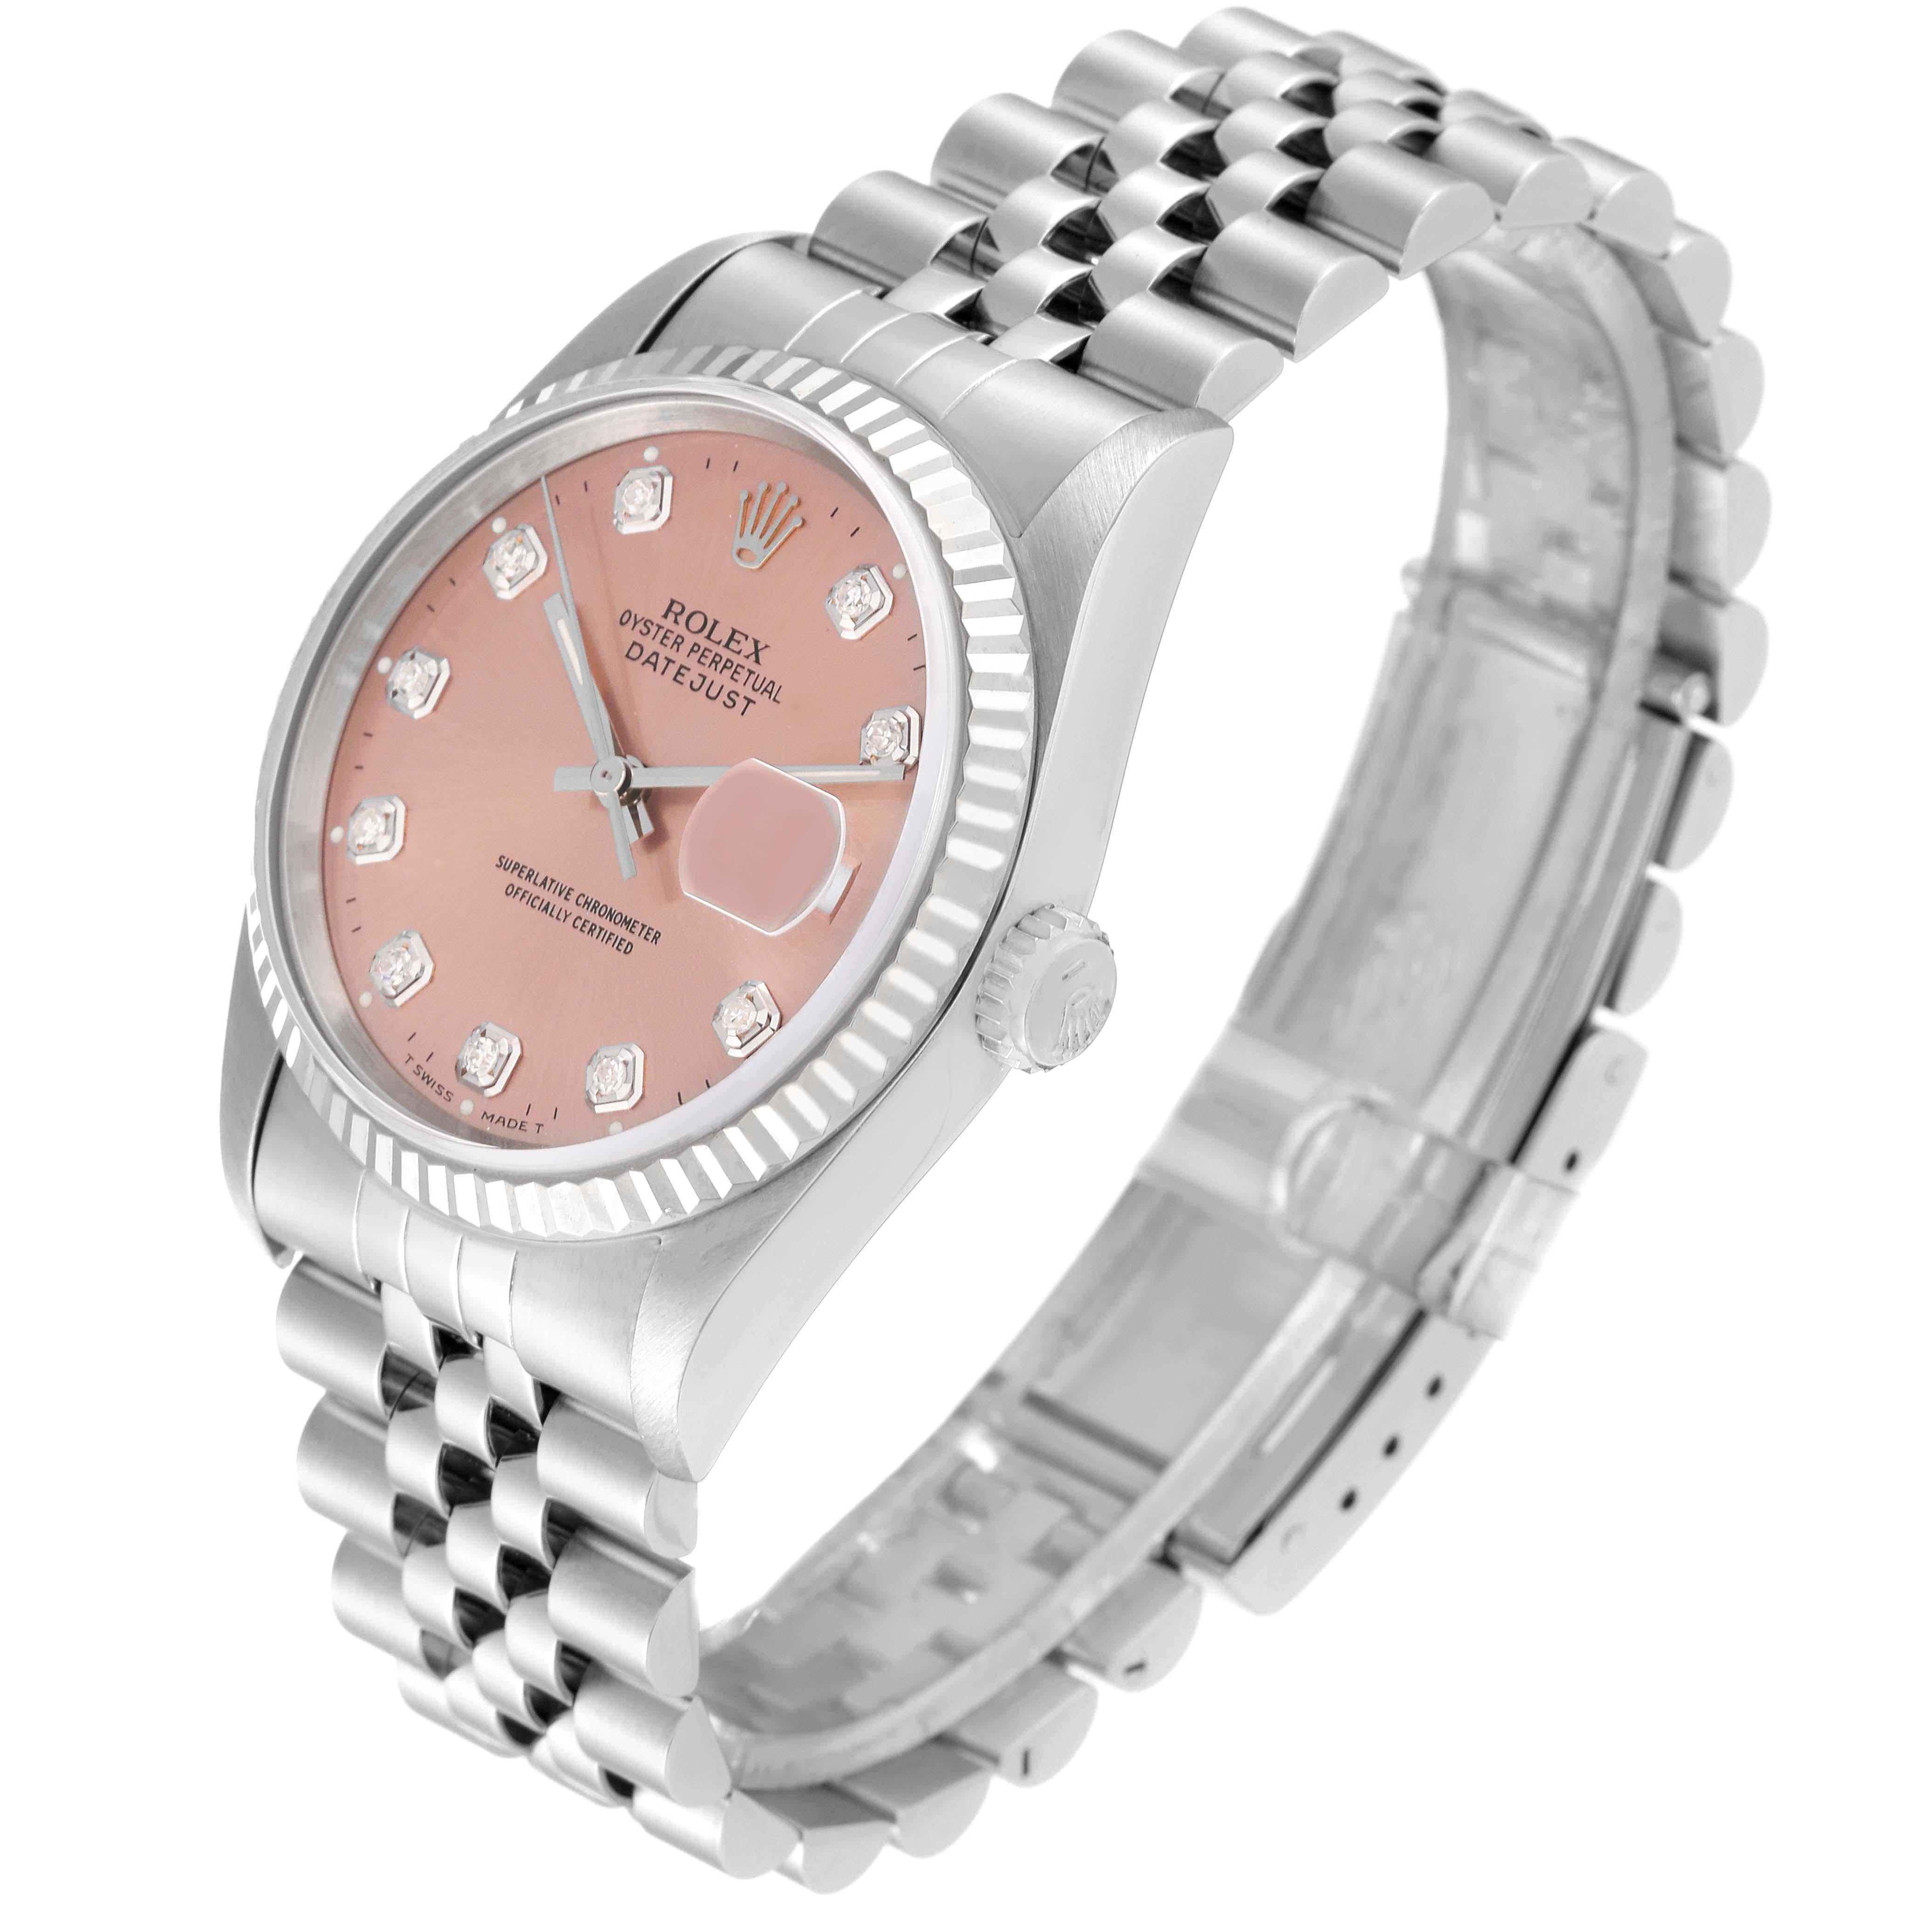 Rolex Datejust Steel White Gold Salmon Diamond Dial Mens Watch 16234 In Excellent Condition For Sale In Atlanta, GA